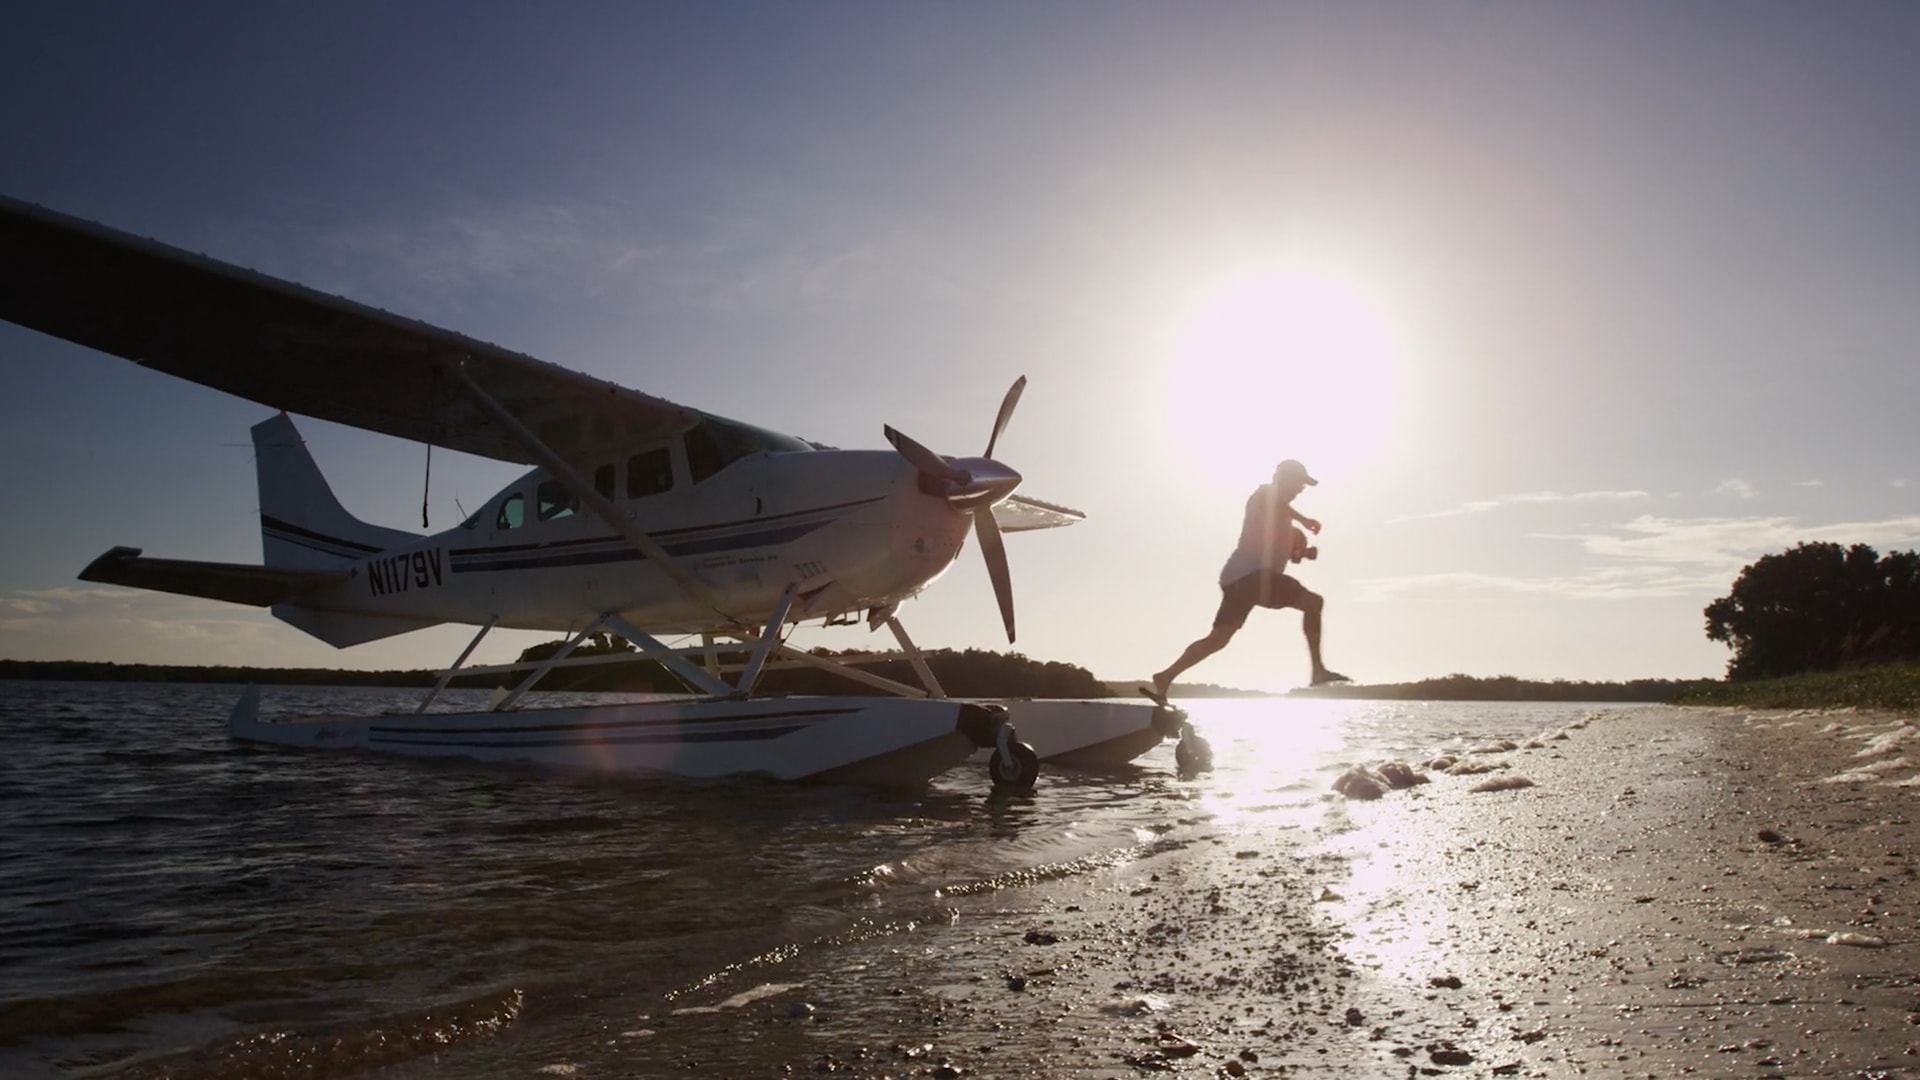 A man jumping onto the beach from a parked seaplane.